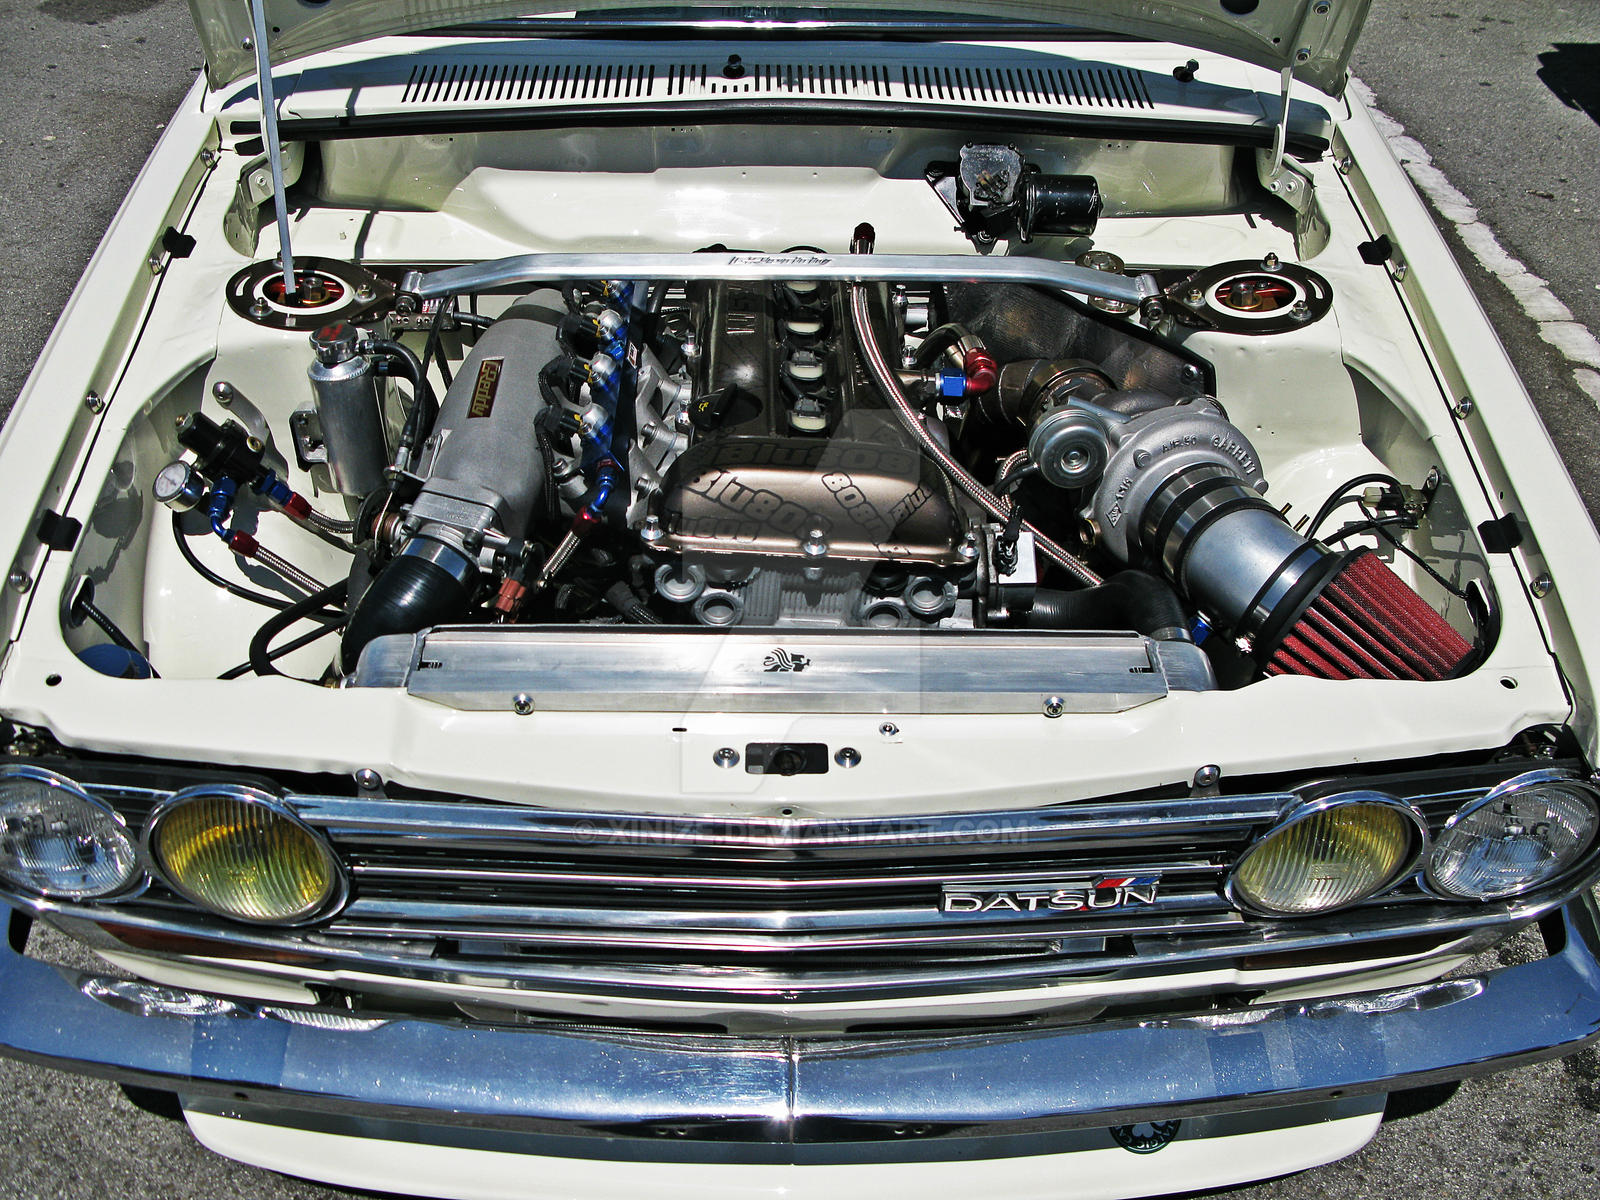 datsun_510_engine_bay_by_xinize-d6hlgts.